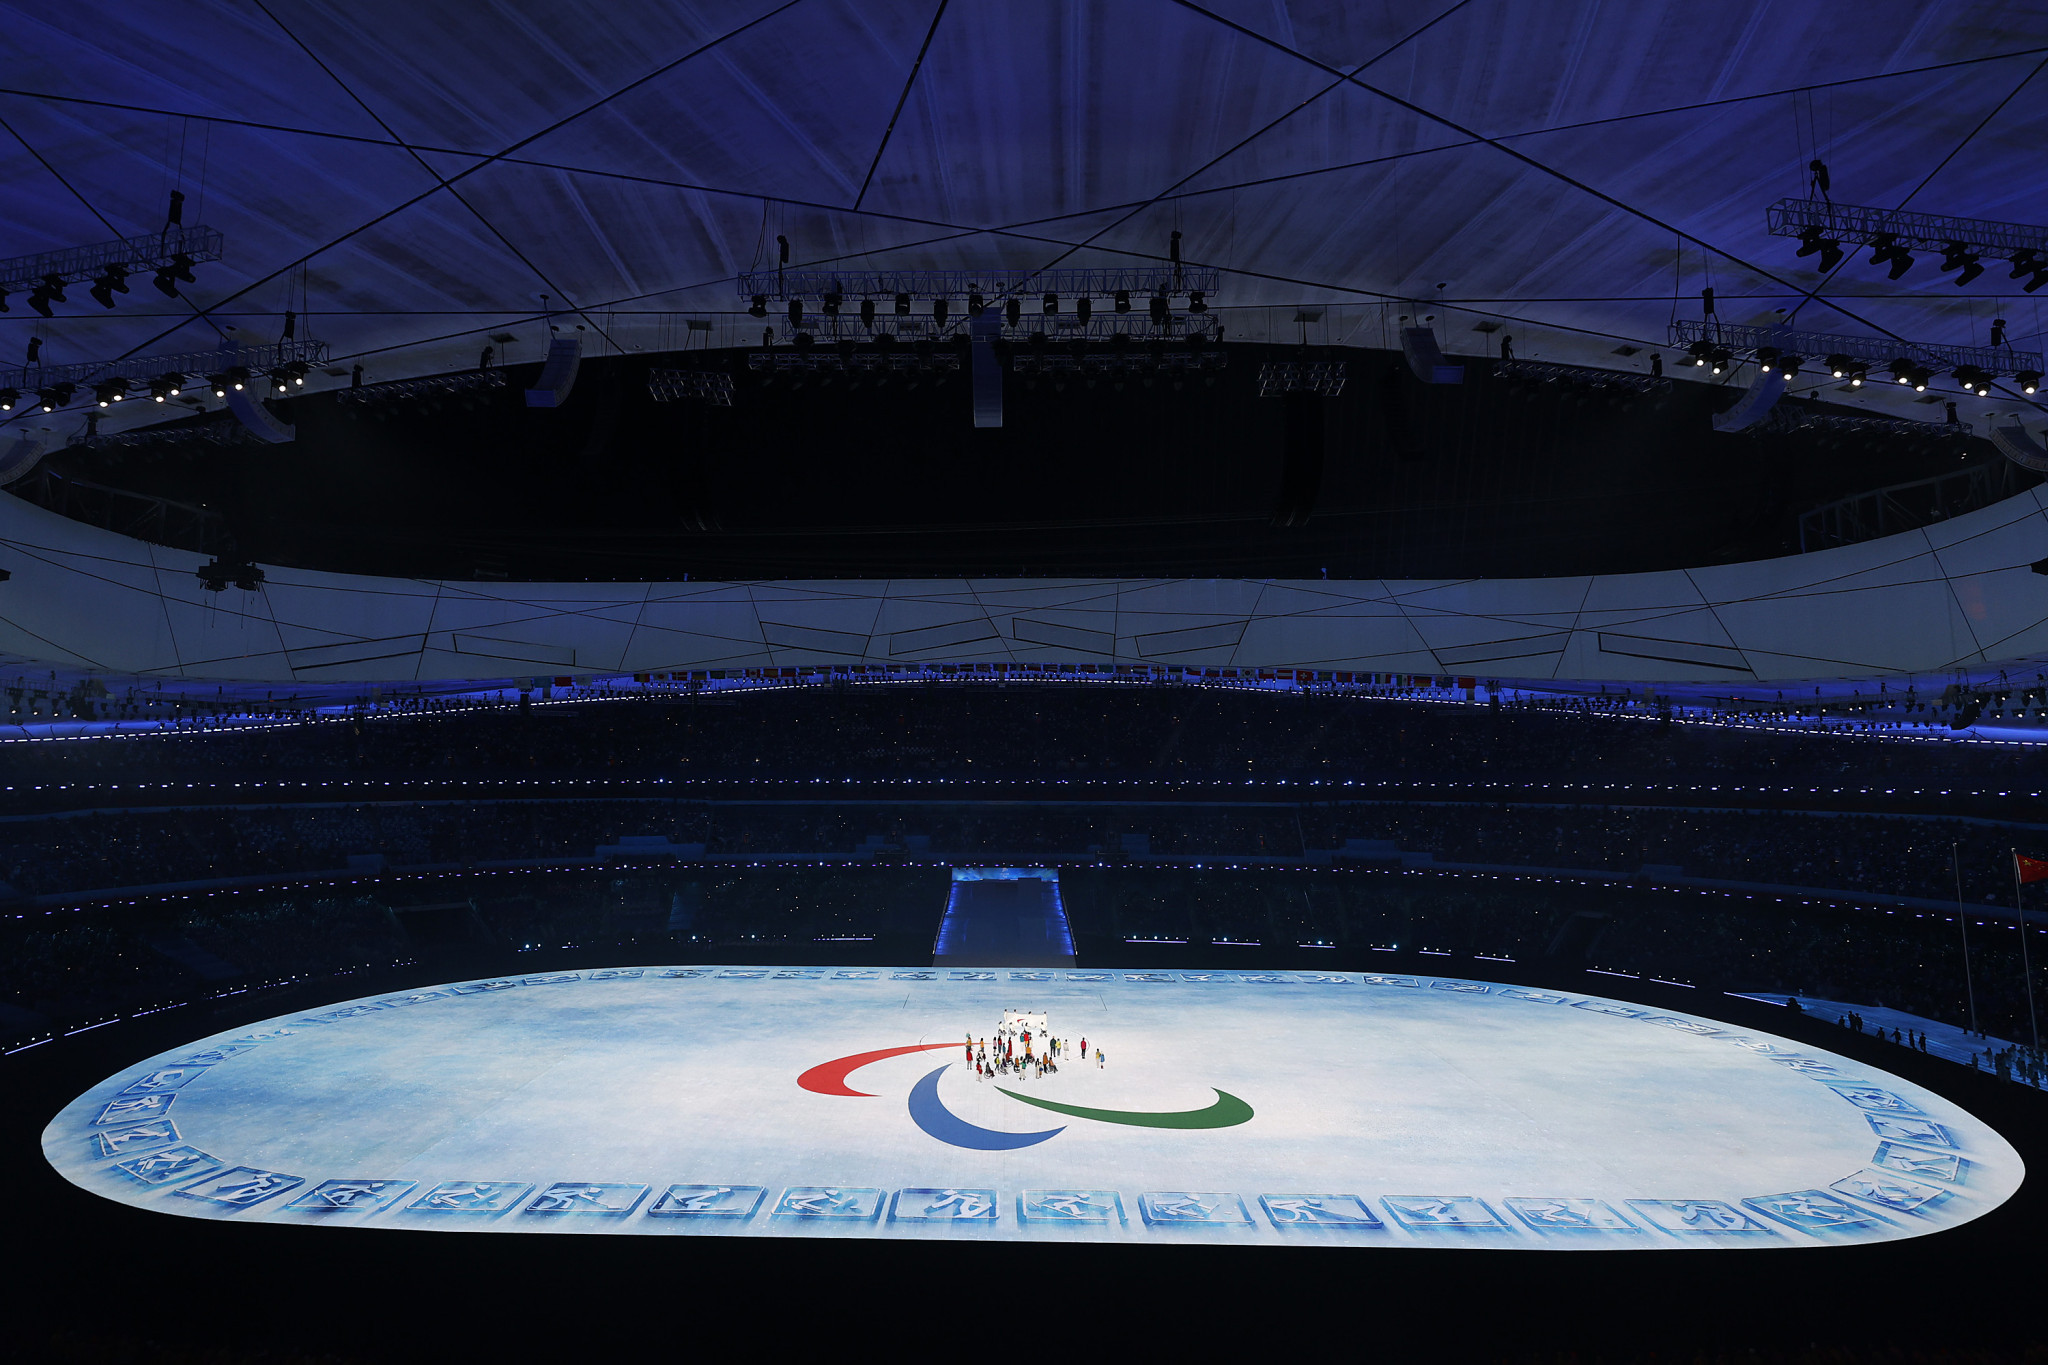 The Paralympic Agitos symbol lit up the floor ©Getty Images